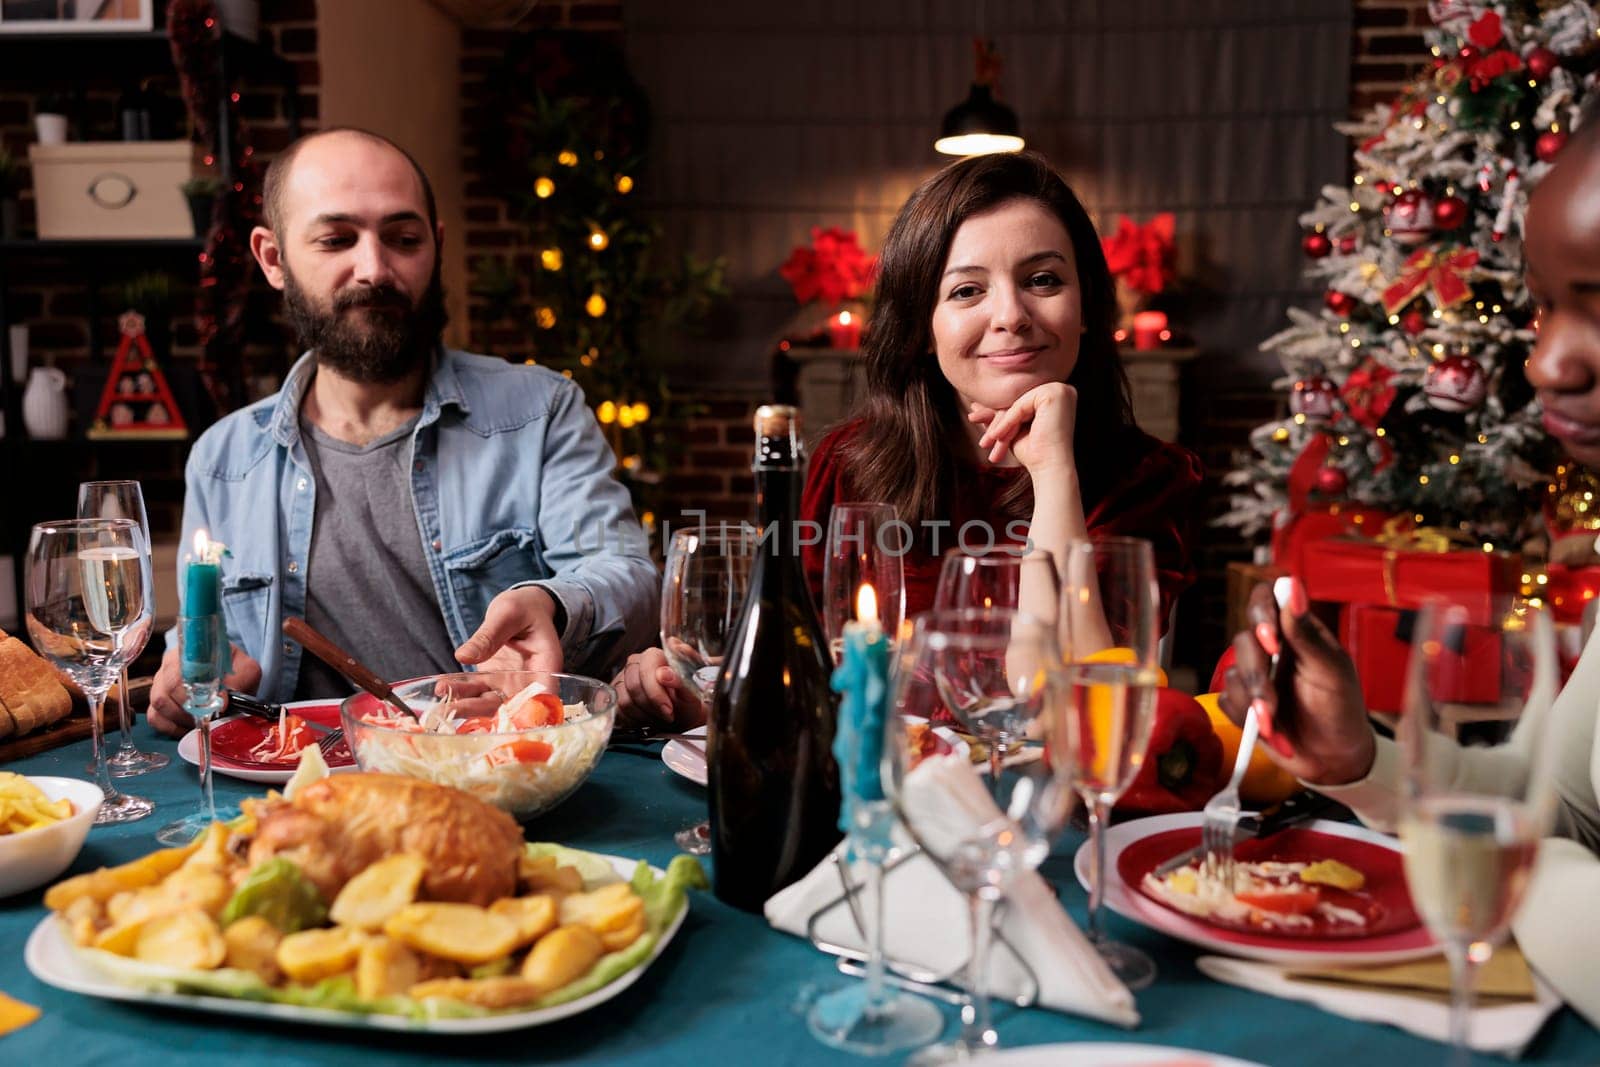 Young couple celebrating xmas with family, woman attending festive dinner during christmas eve holiday at home. Persons enjoying traditional food on the table, feeling merry and jolly.